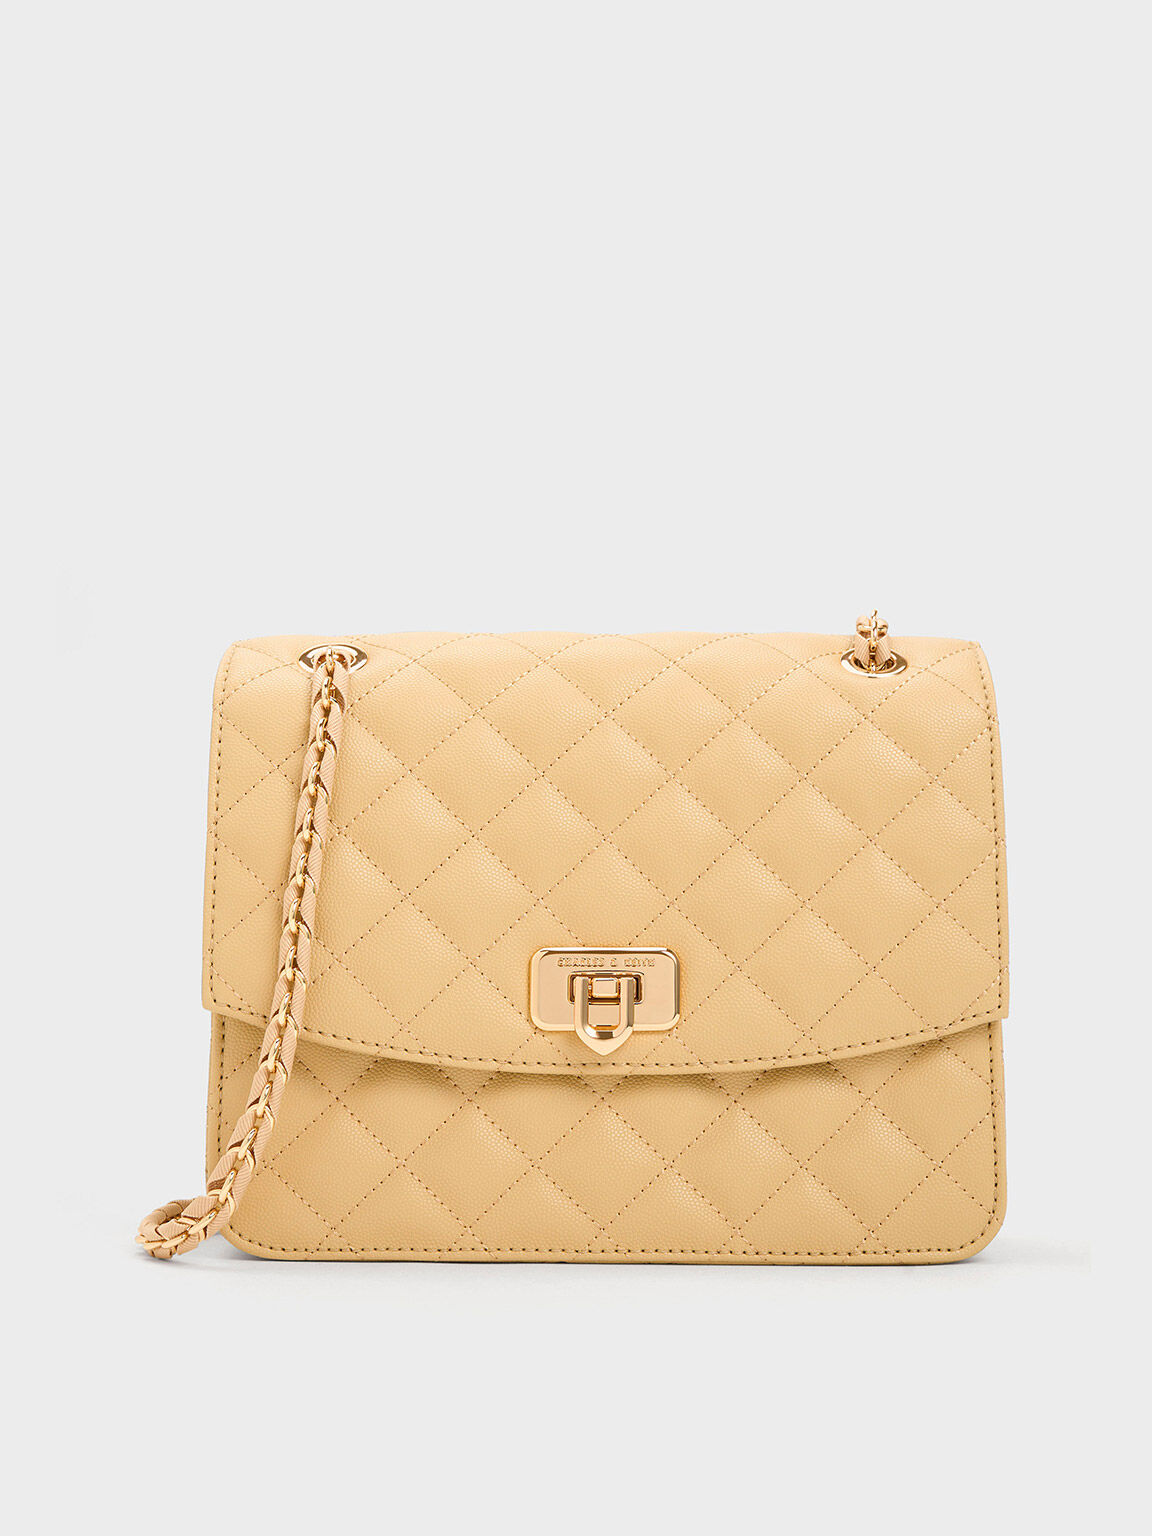 Women Quilted Purse Clutch Small Crossbody Shoulder Bag with Chain Strap  Leather,creamy-white,creamy-white，G115727 - Walmart.com